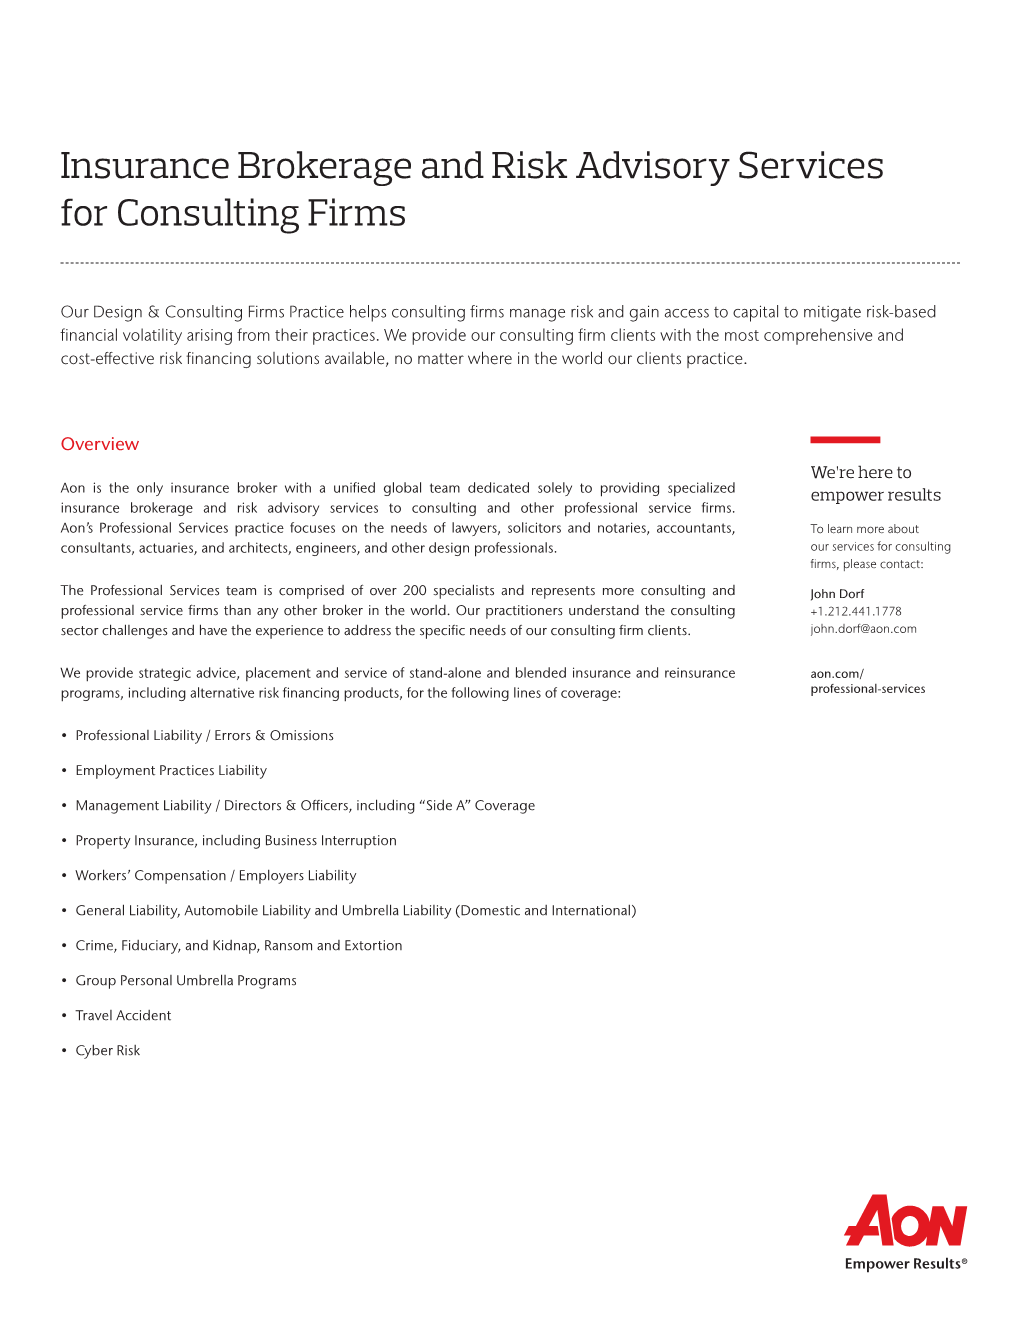 Insurance Brokerage and Risk Advisory Services for Consulting Firms